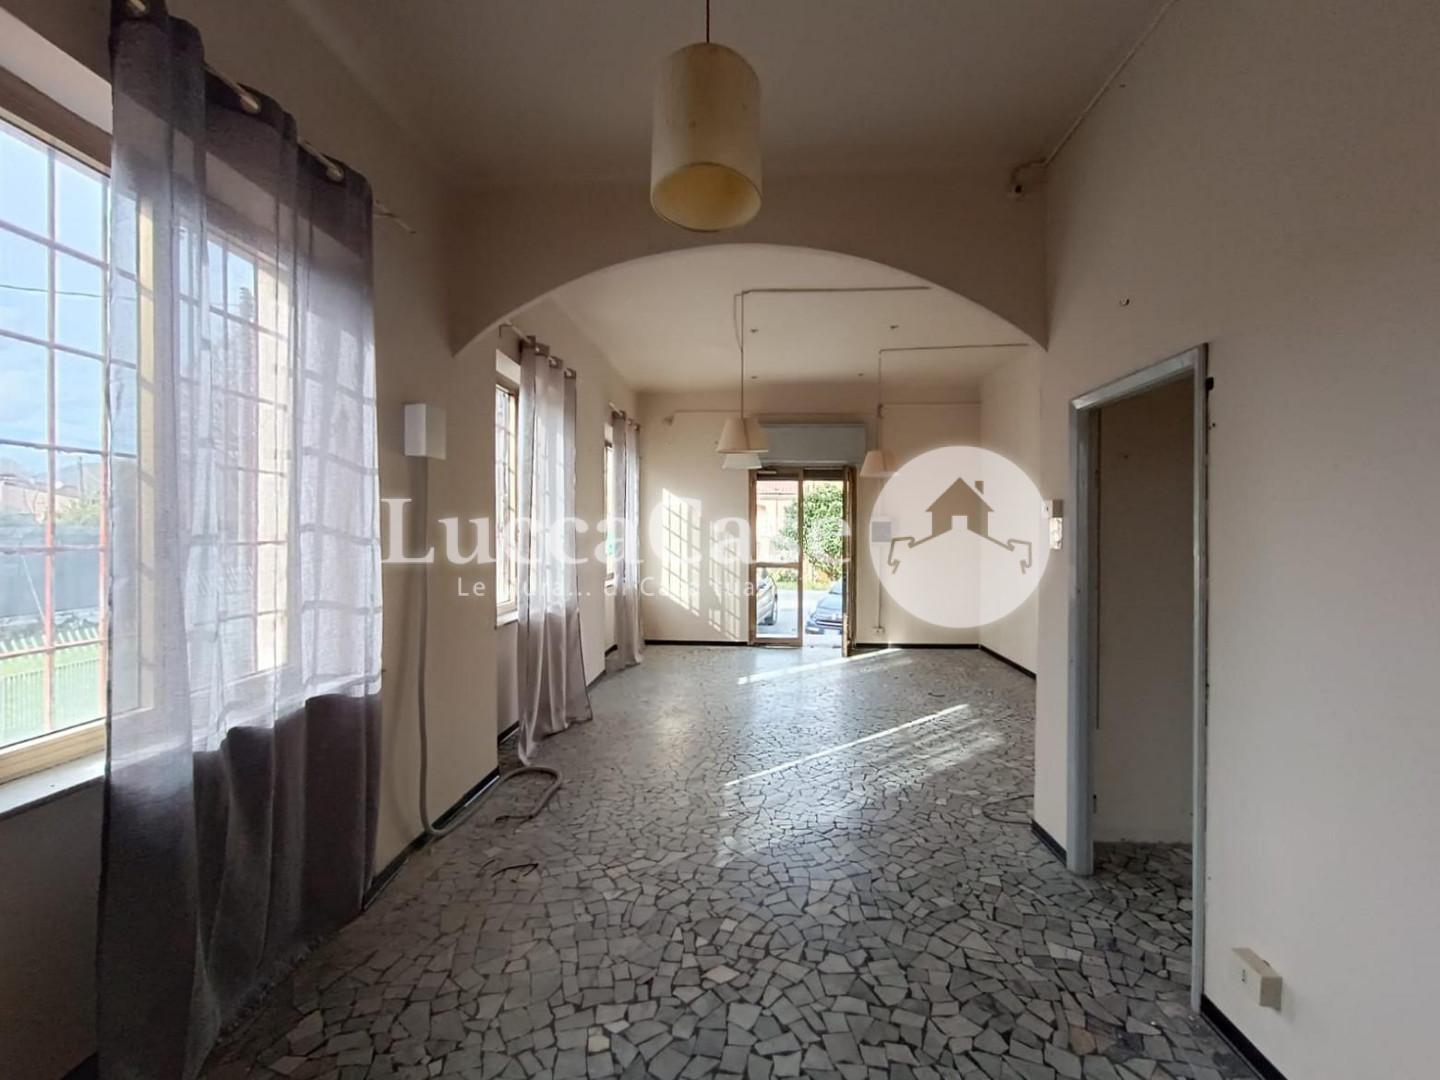 Business mall for commercial rentals in Lucca